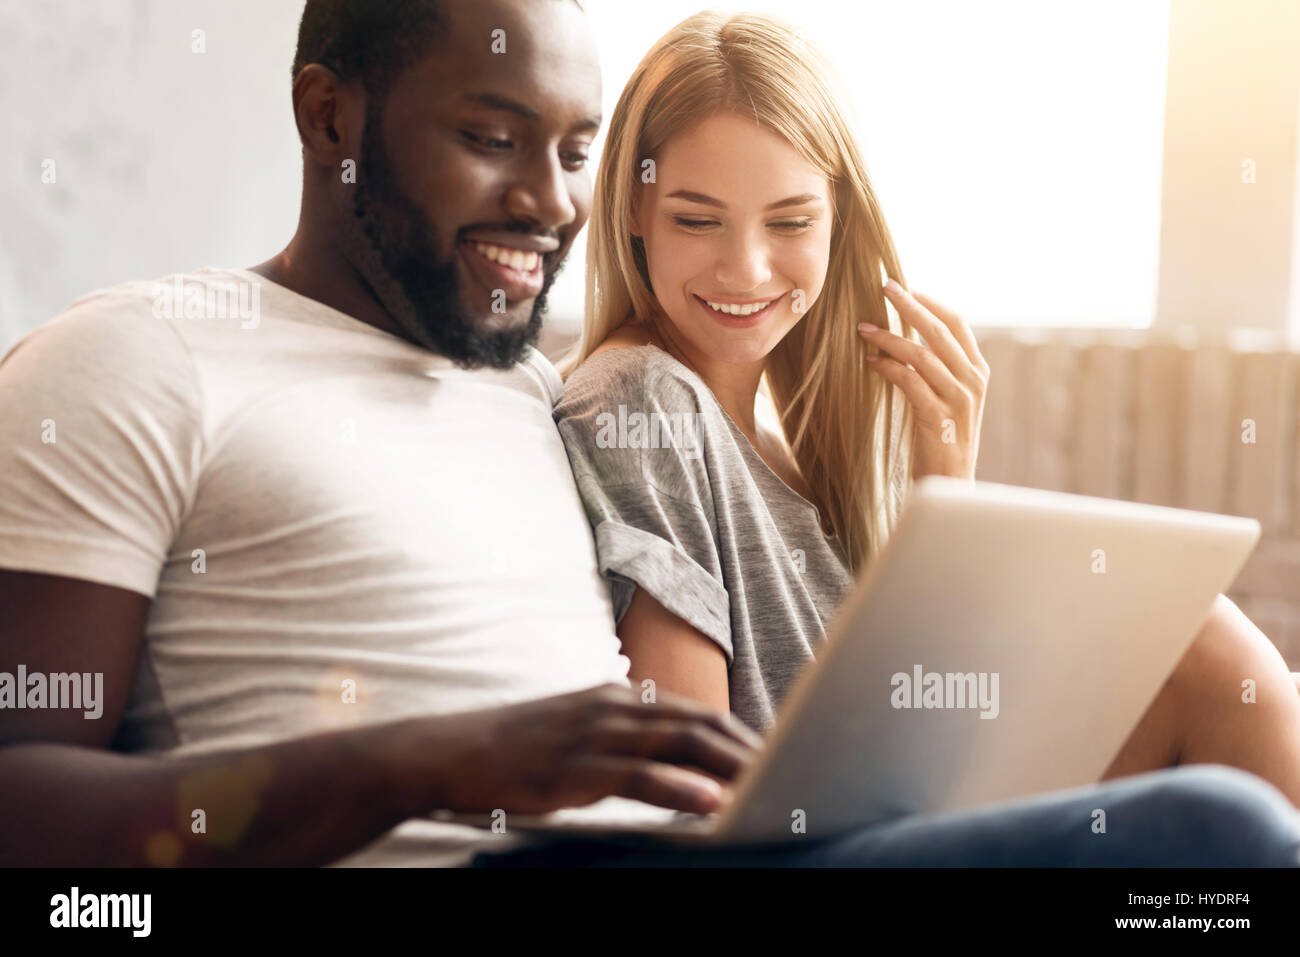 Peaceful international couple relaxing at home Stock Photo